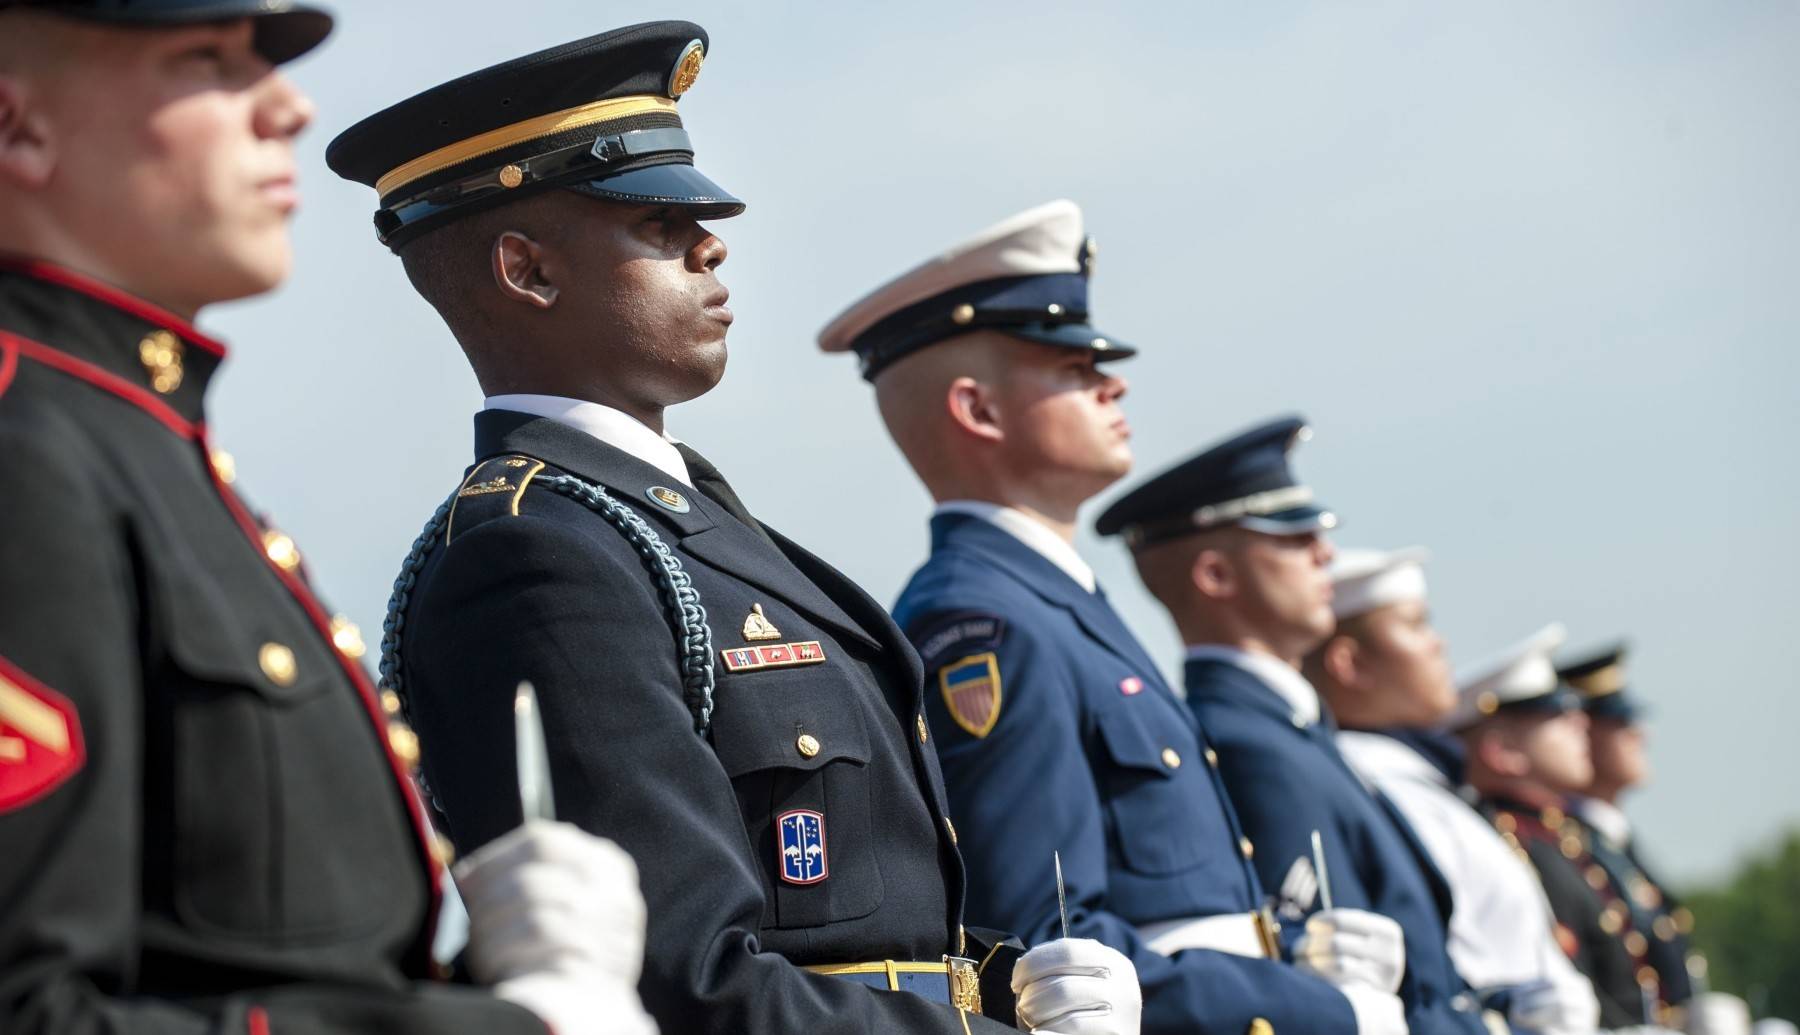 Members of all 5 branches of the military honor guard